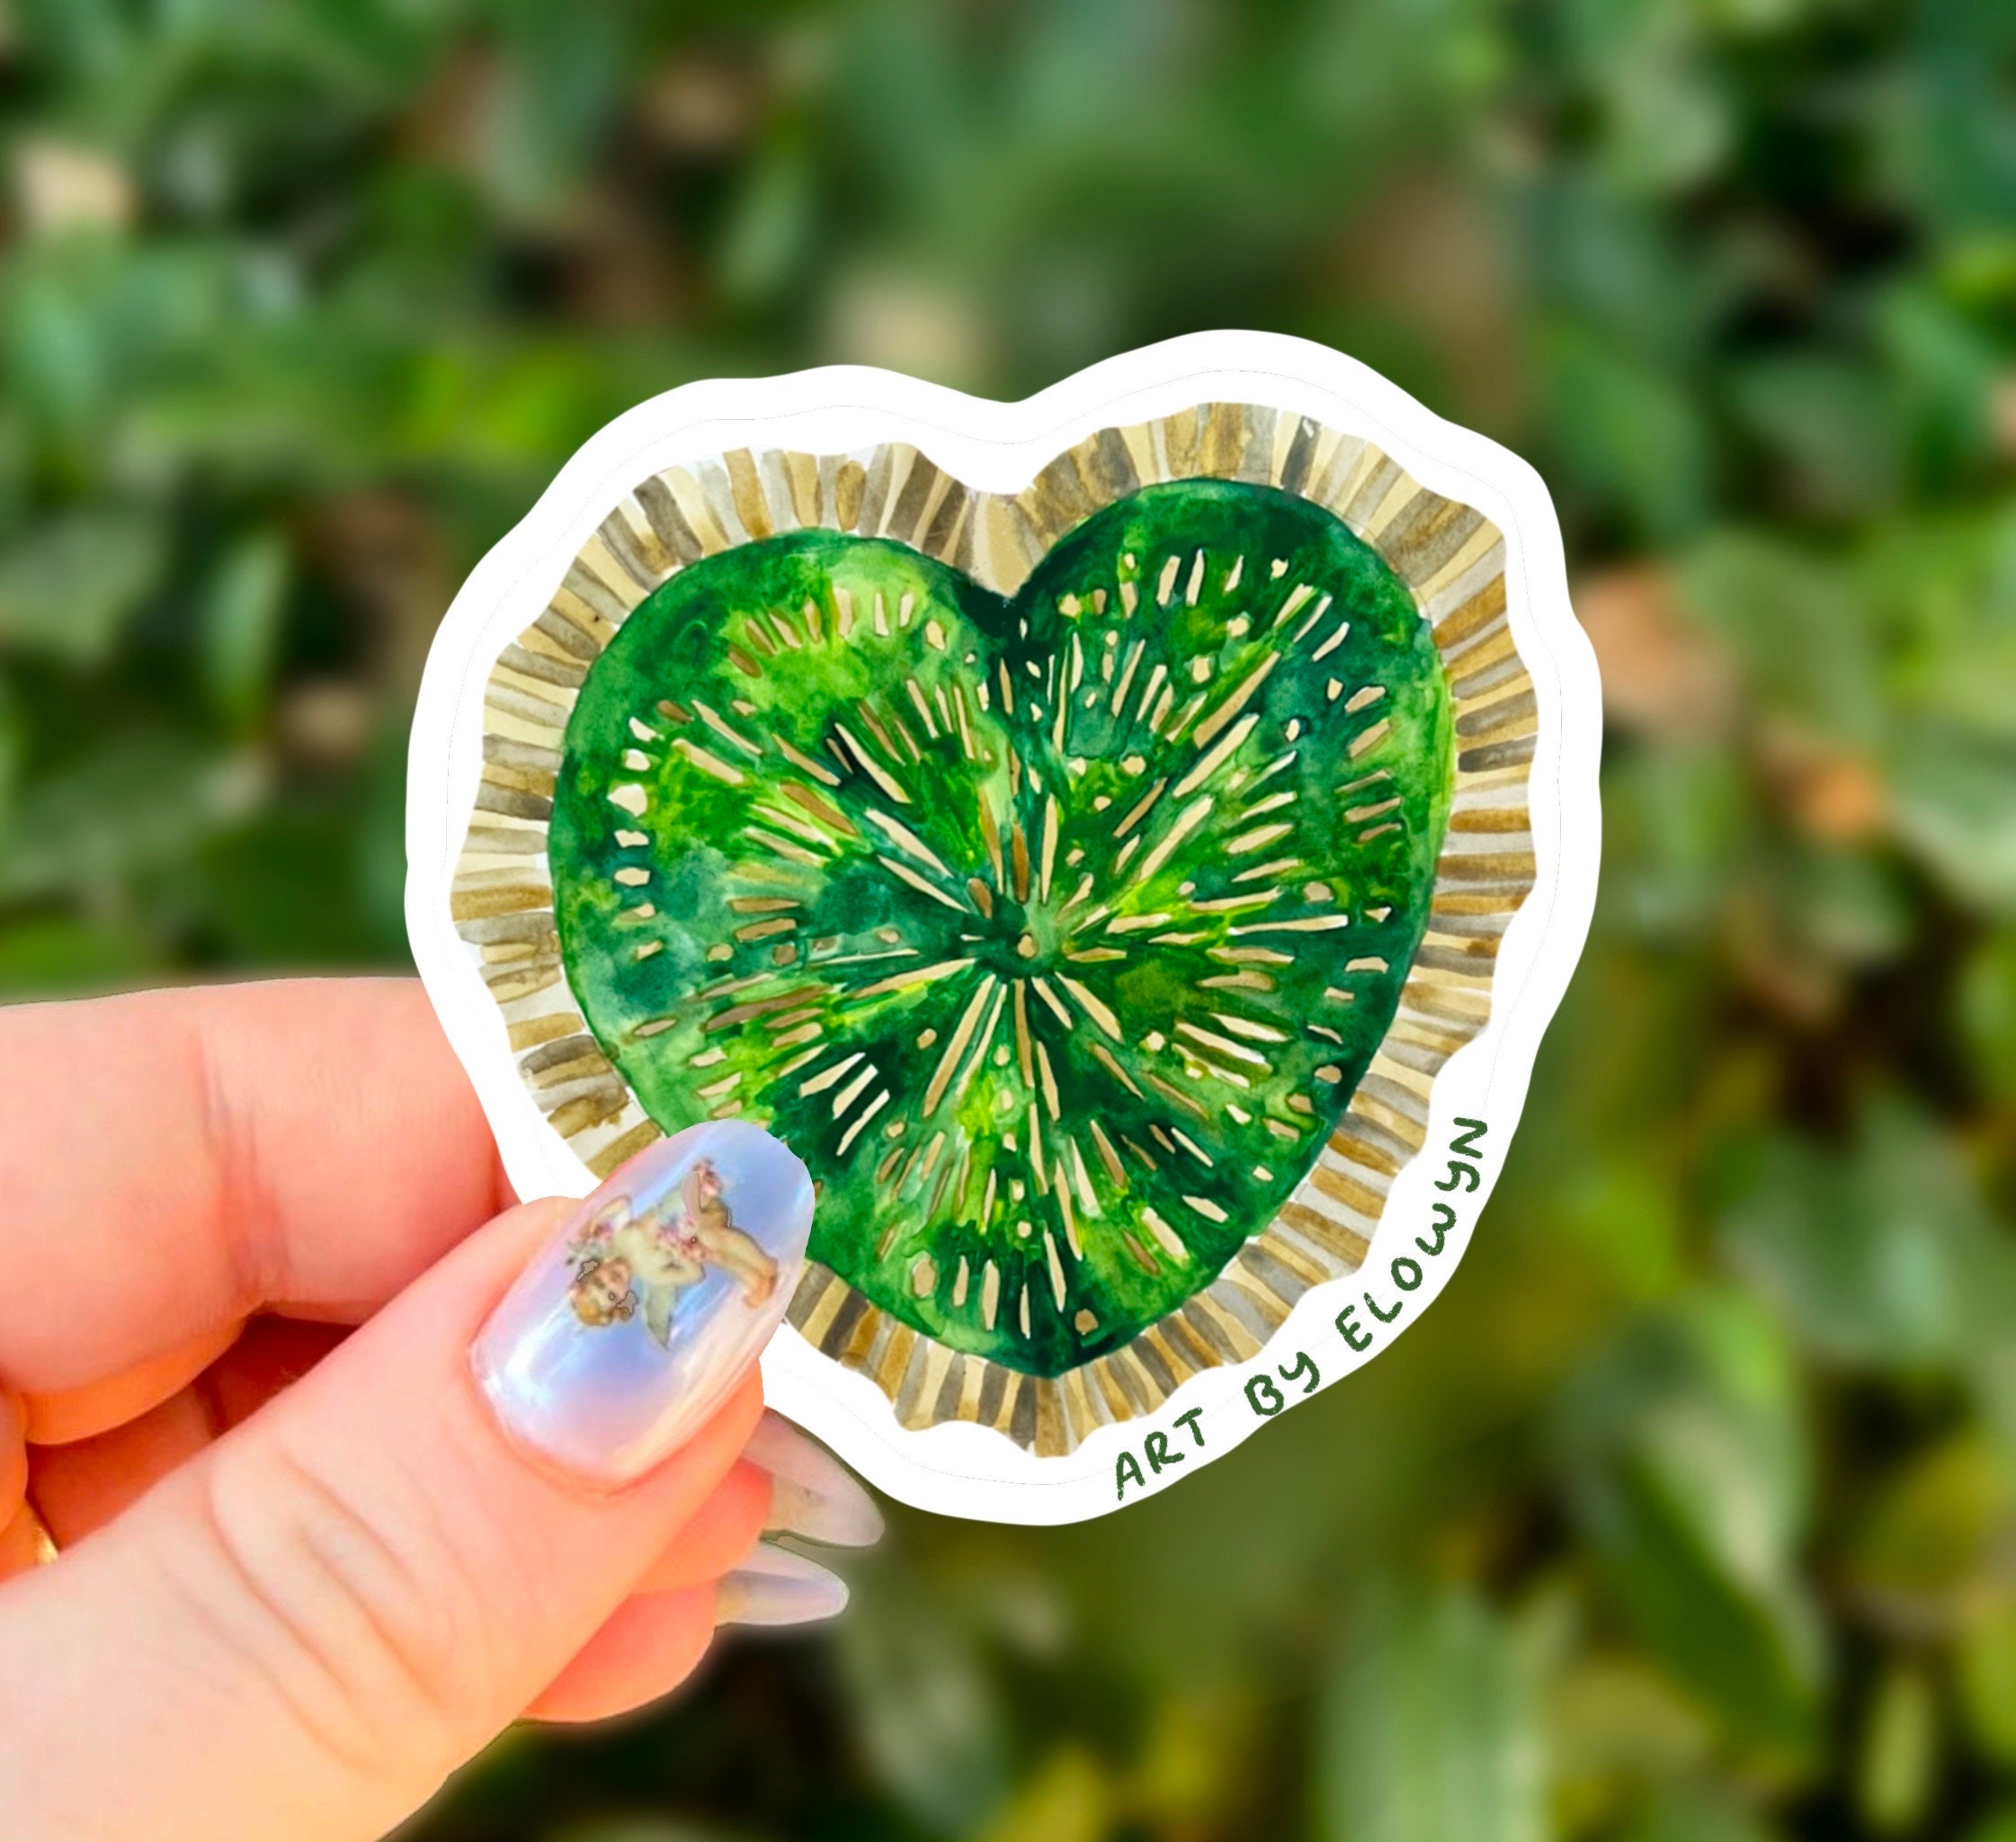 Multi Colored Hand-drawn Heart Stickers Red, Brown, Sage Green, Purple Heart  